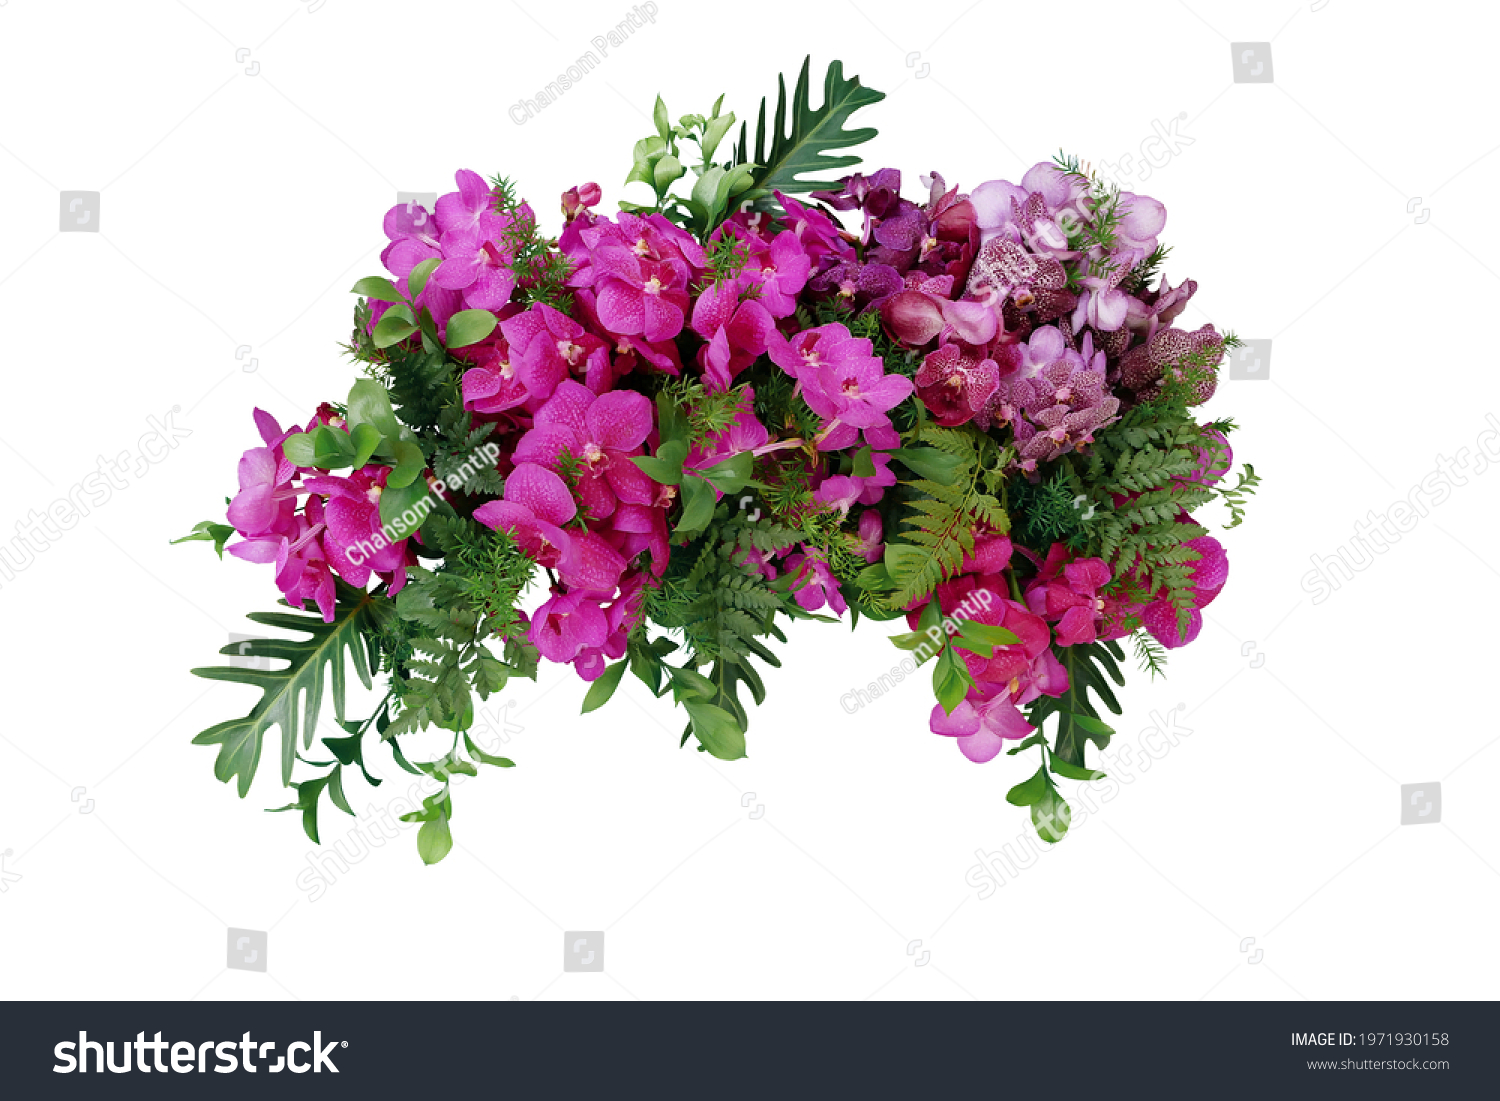 Tropical leaves and flower garland bouquet arrangement mixes orchids flower with tropical foliage fern, philodendron and ruscus leaves isolated on white background with clipping path. #1971930158